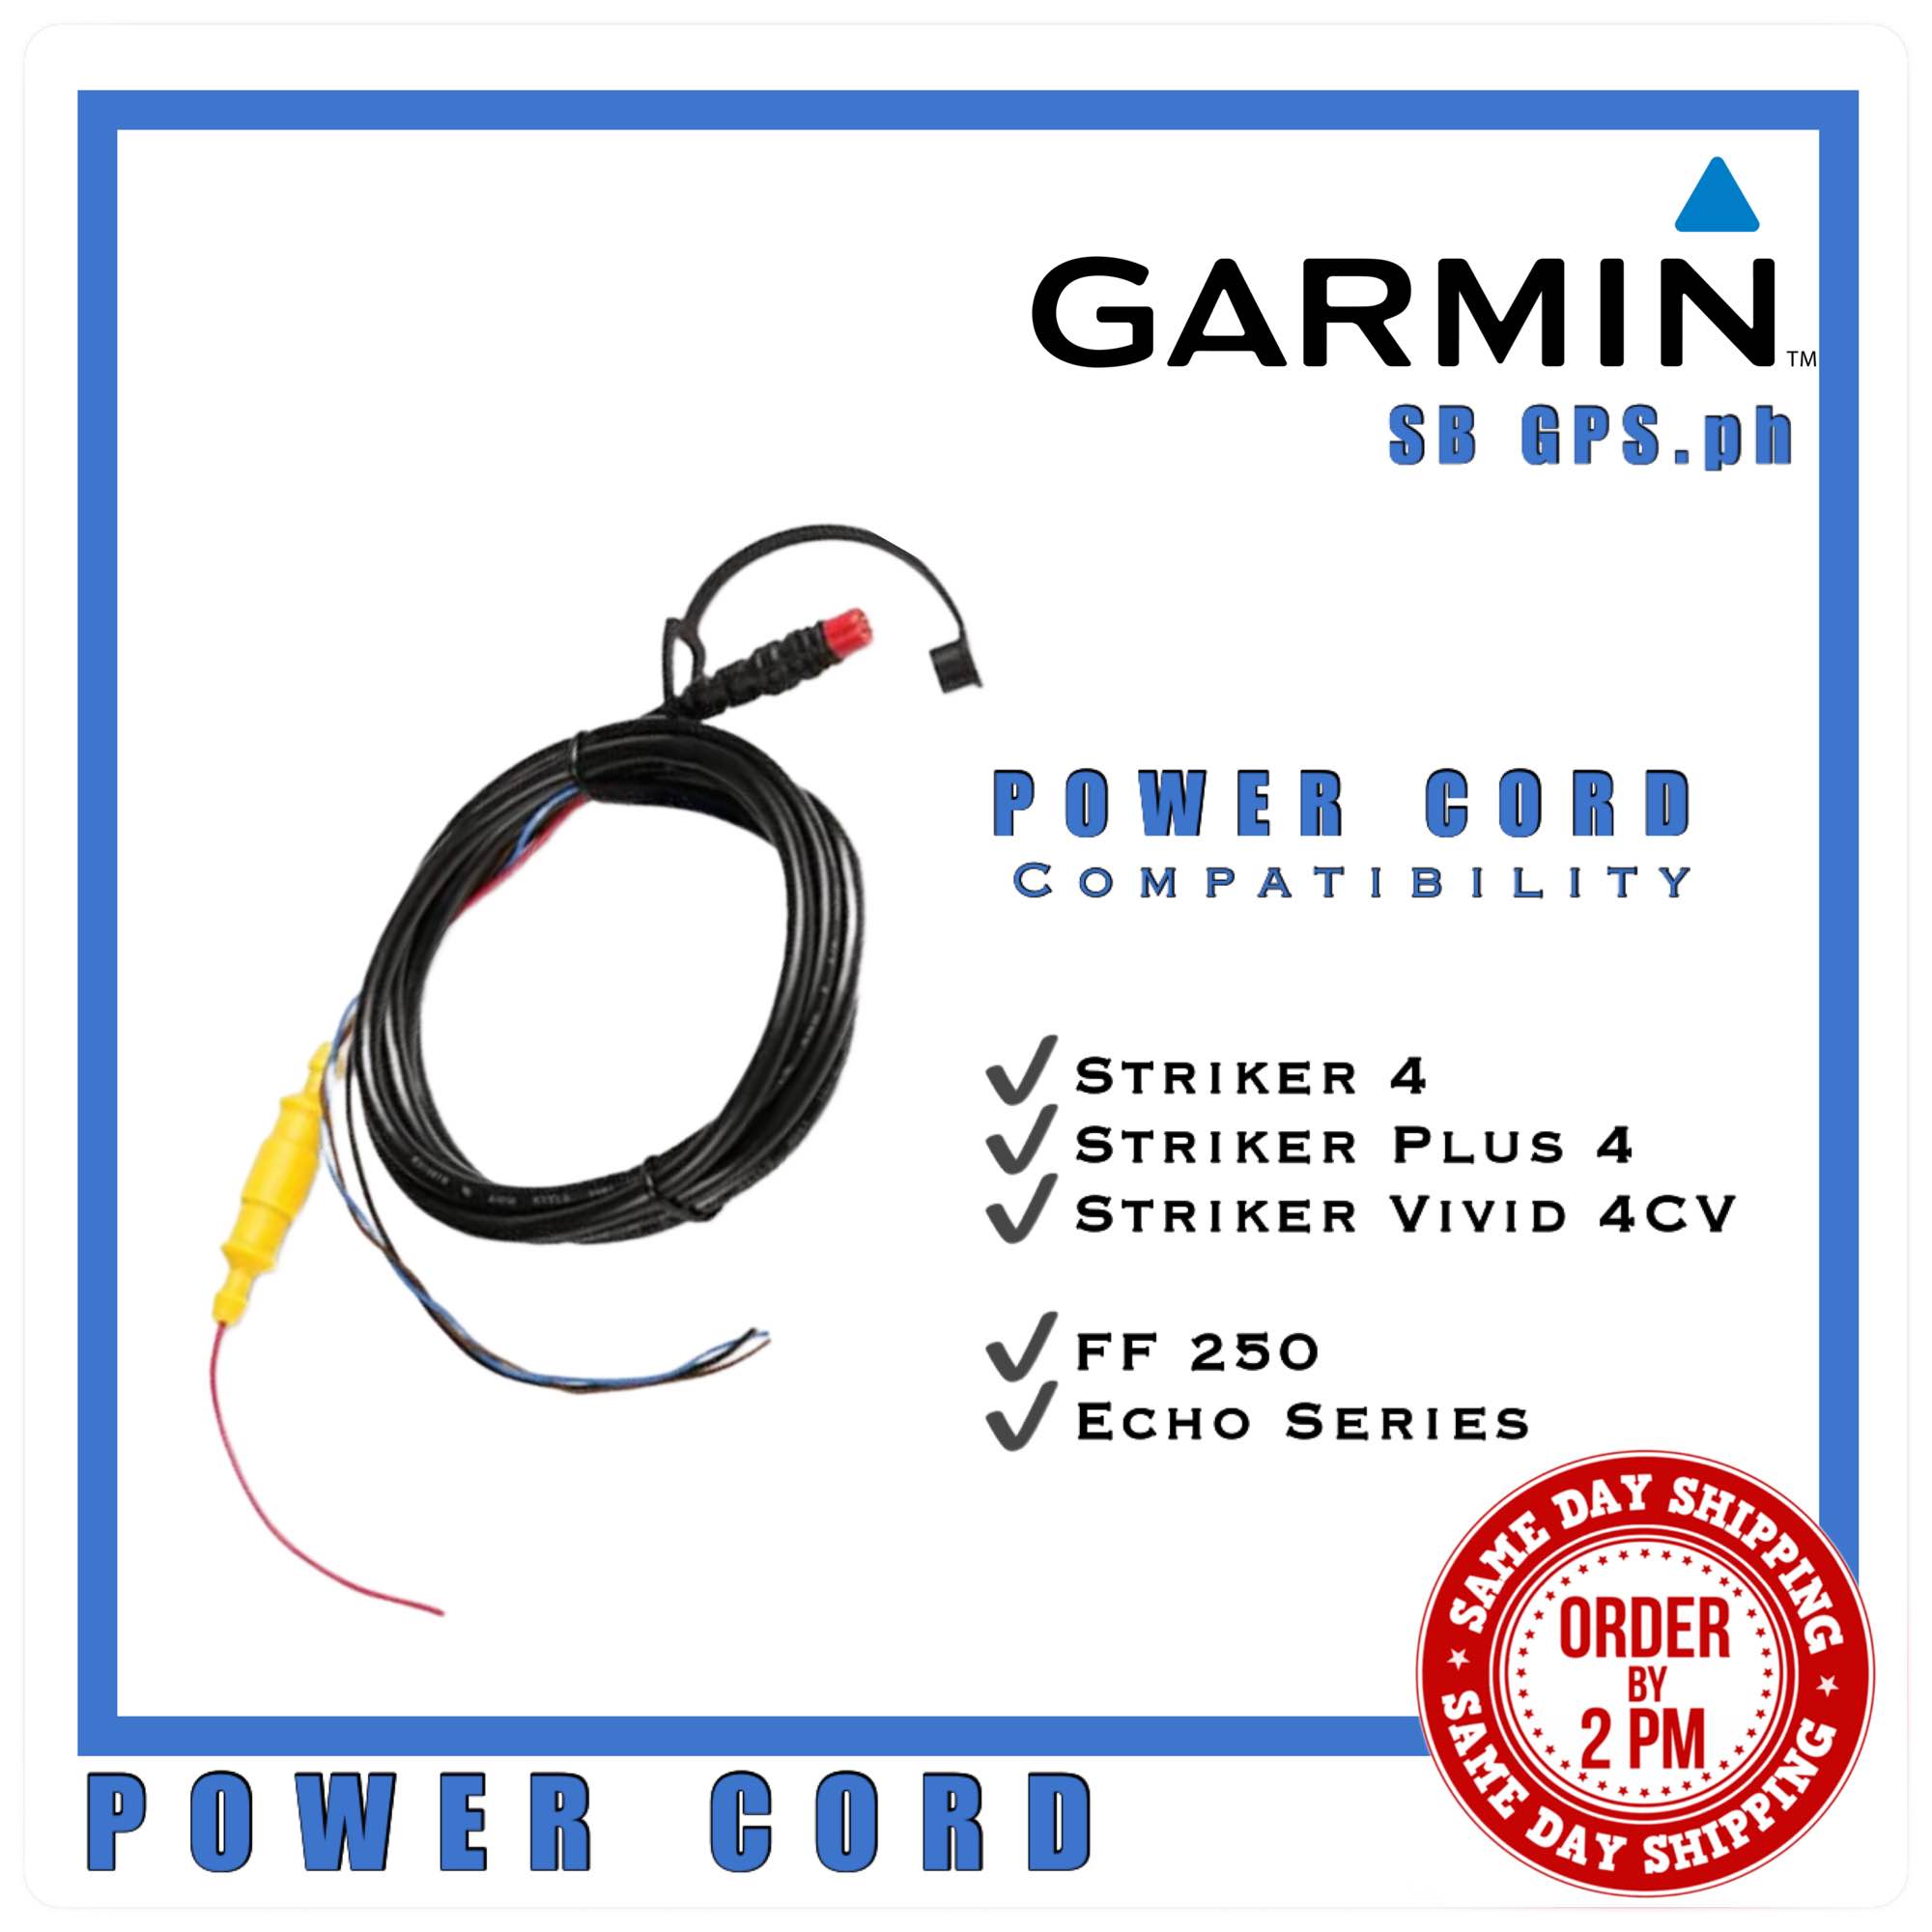 GARMIN Power Cable for Striker (Authentic)